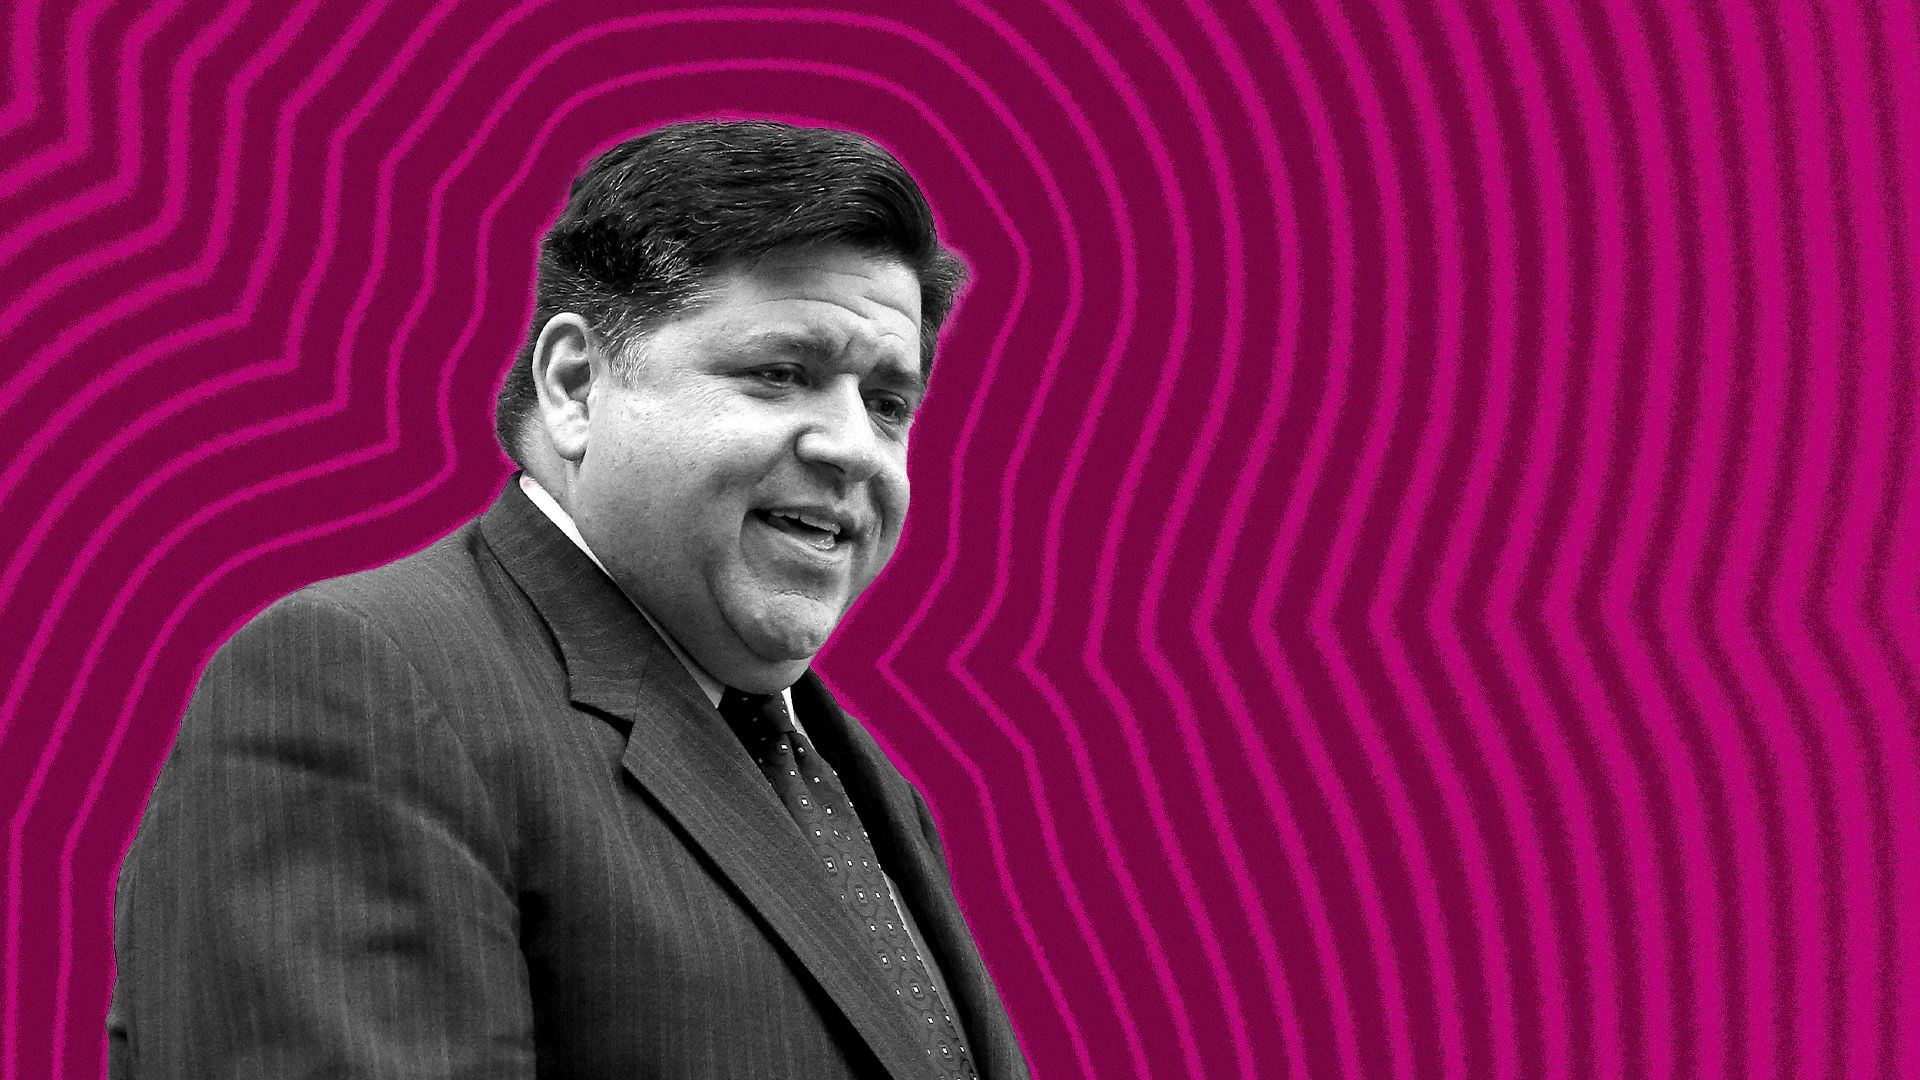 Photo illustration of Illinois Governor J. B. Pritzker with lines radiating from him.